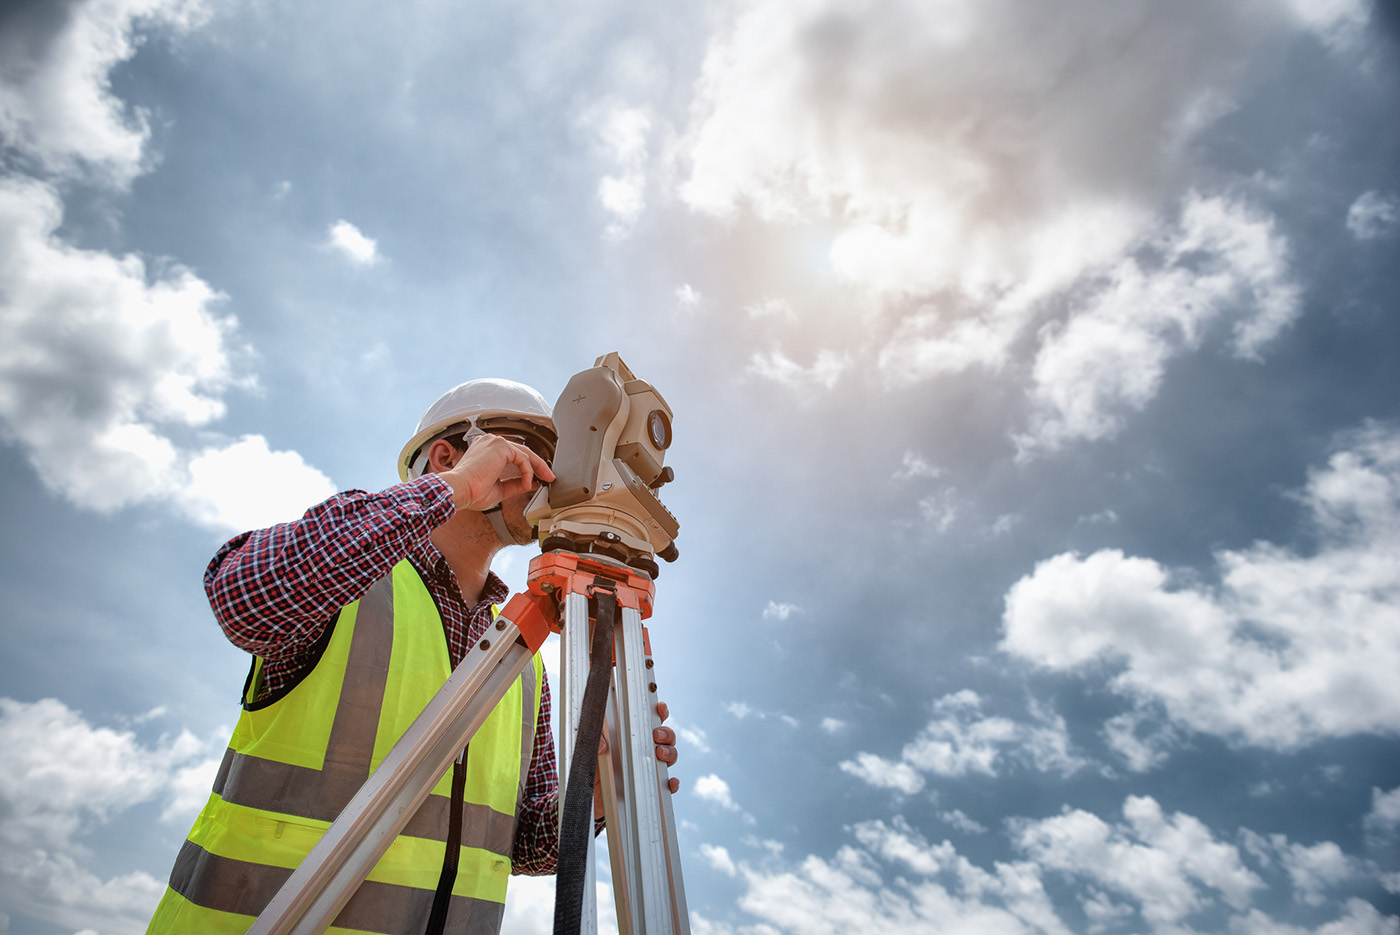 Surveyor Engineering. Surveyor Using Telescope At Construction Site, Surveying For Making Contour Plans Are A Graphical Representation Of The Lay Of The Land Before Startup Construction Work.